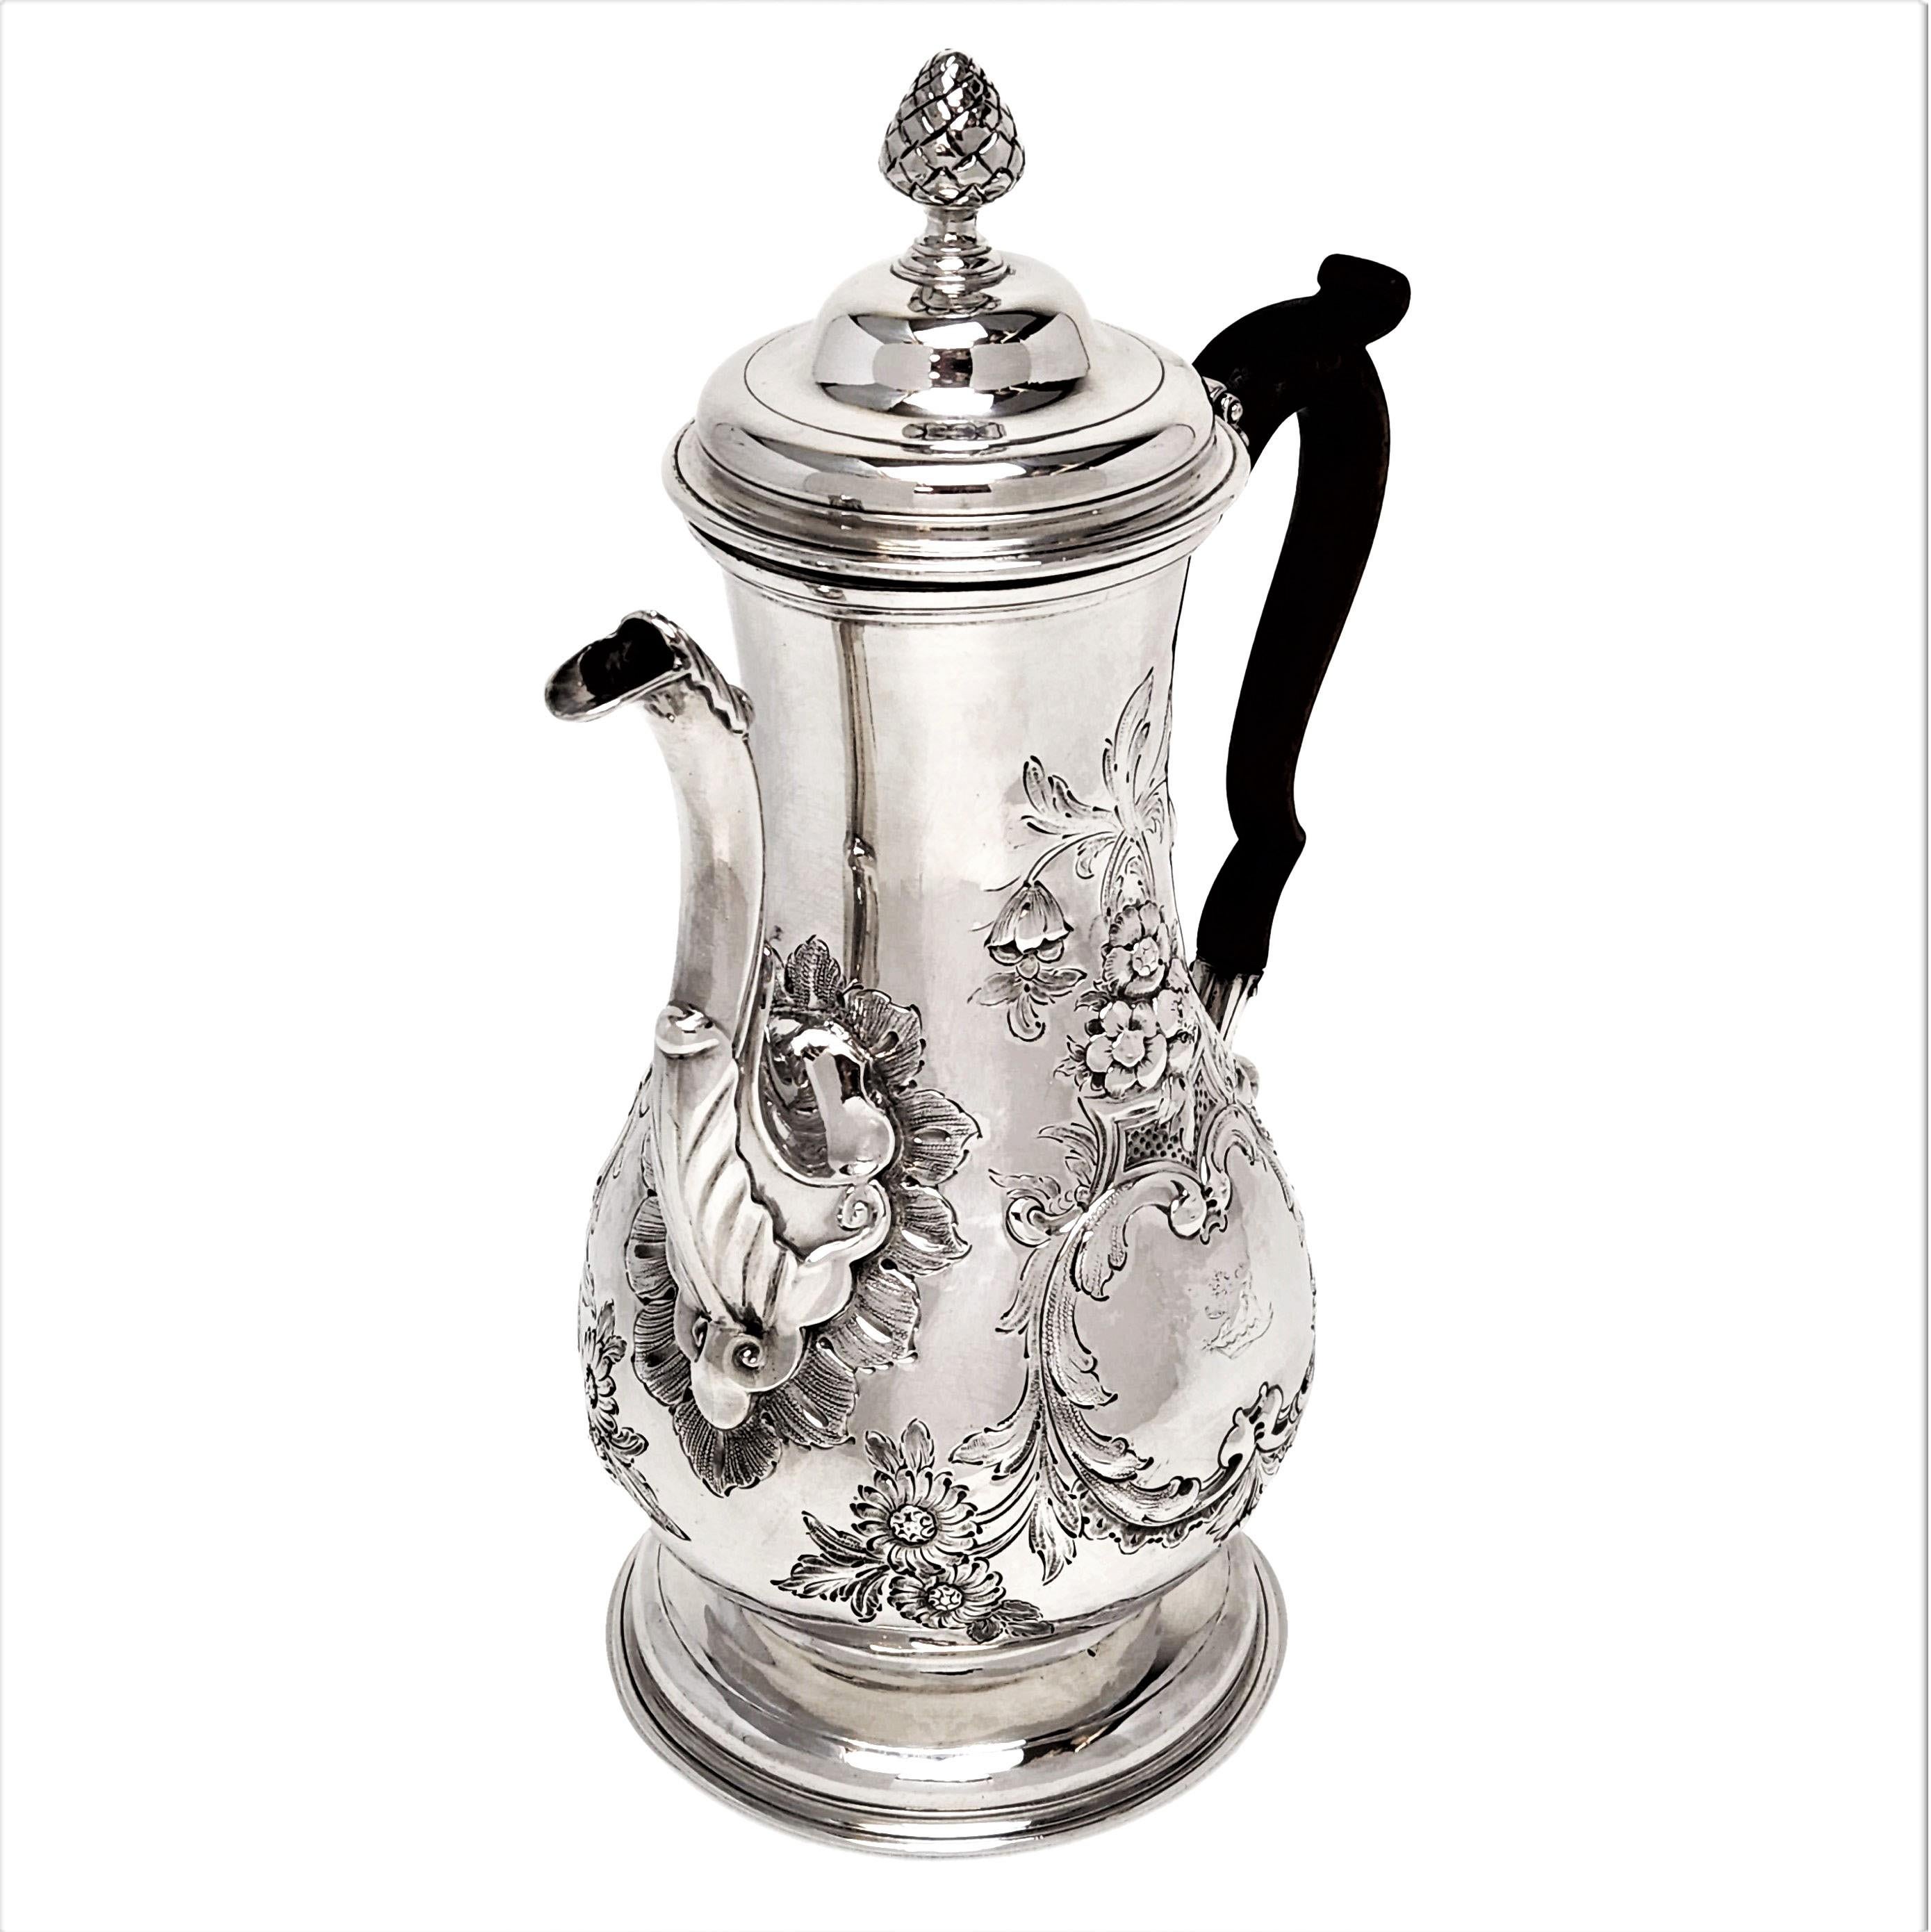 An impressive Antique Irish Provincial Sterling Silver Coffee Pot with a classic baluster form and decorated with elegant floral chased patterns. The Cork Coffee Pot has a pair of shaped cartouches, one plain and one with a small engraved crest